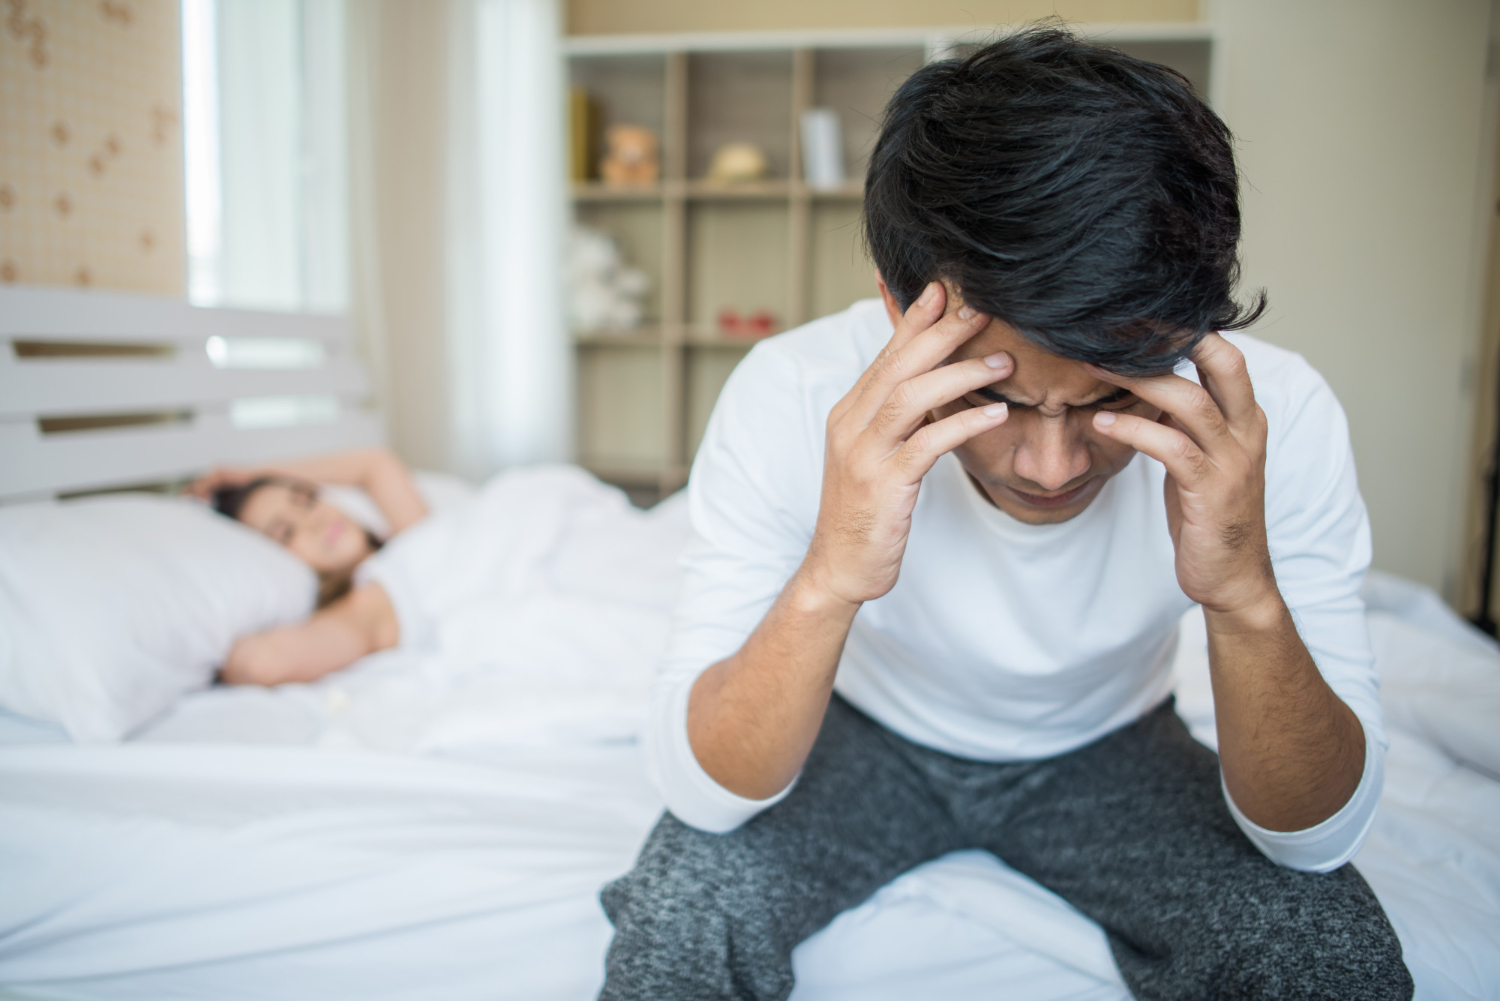 Erectile Dysfunction – What Is It? And Its Symptoms, Causes And Treatment